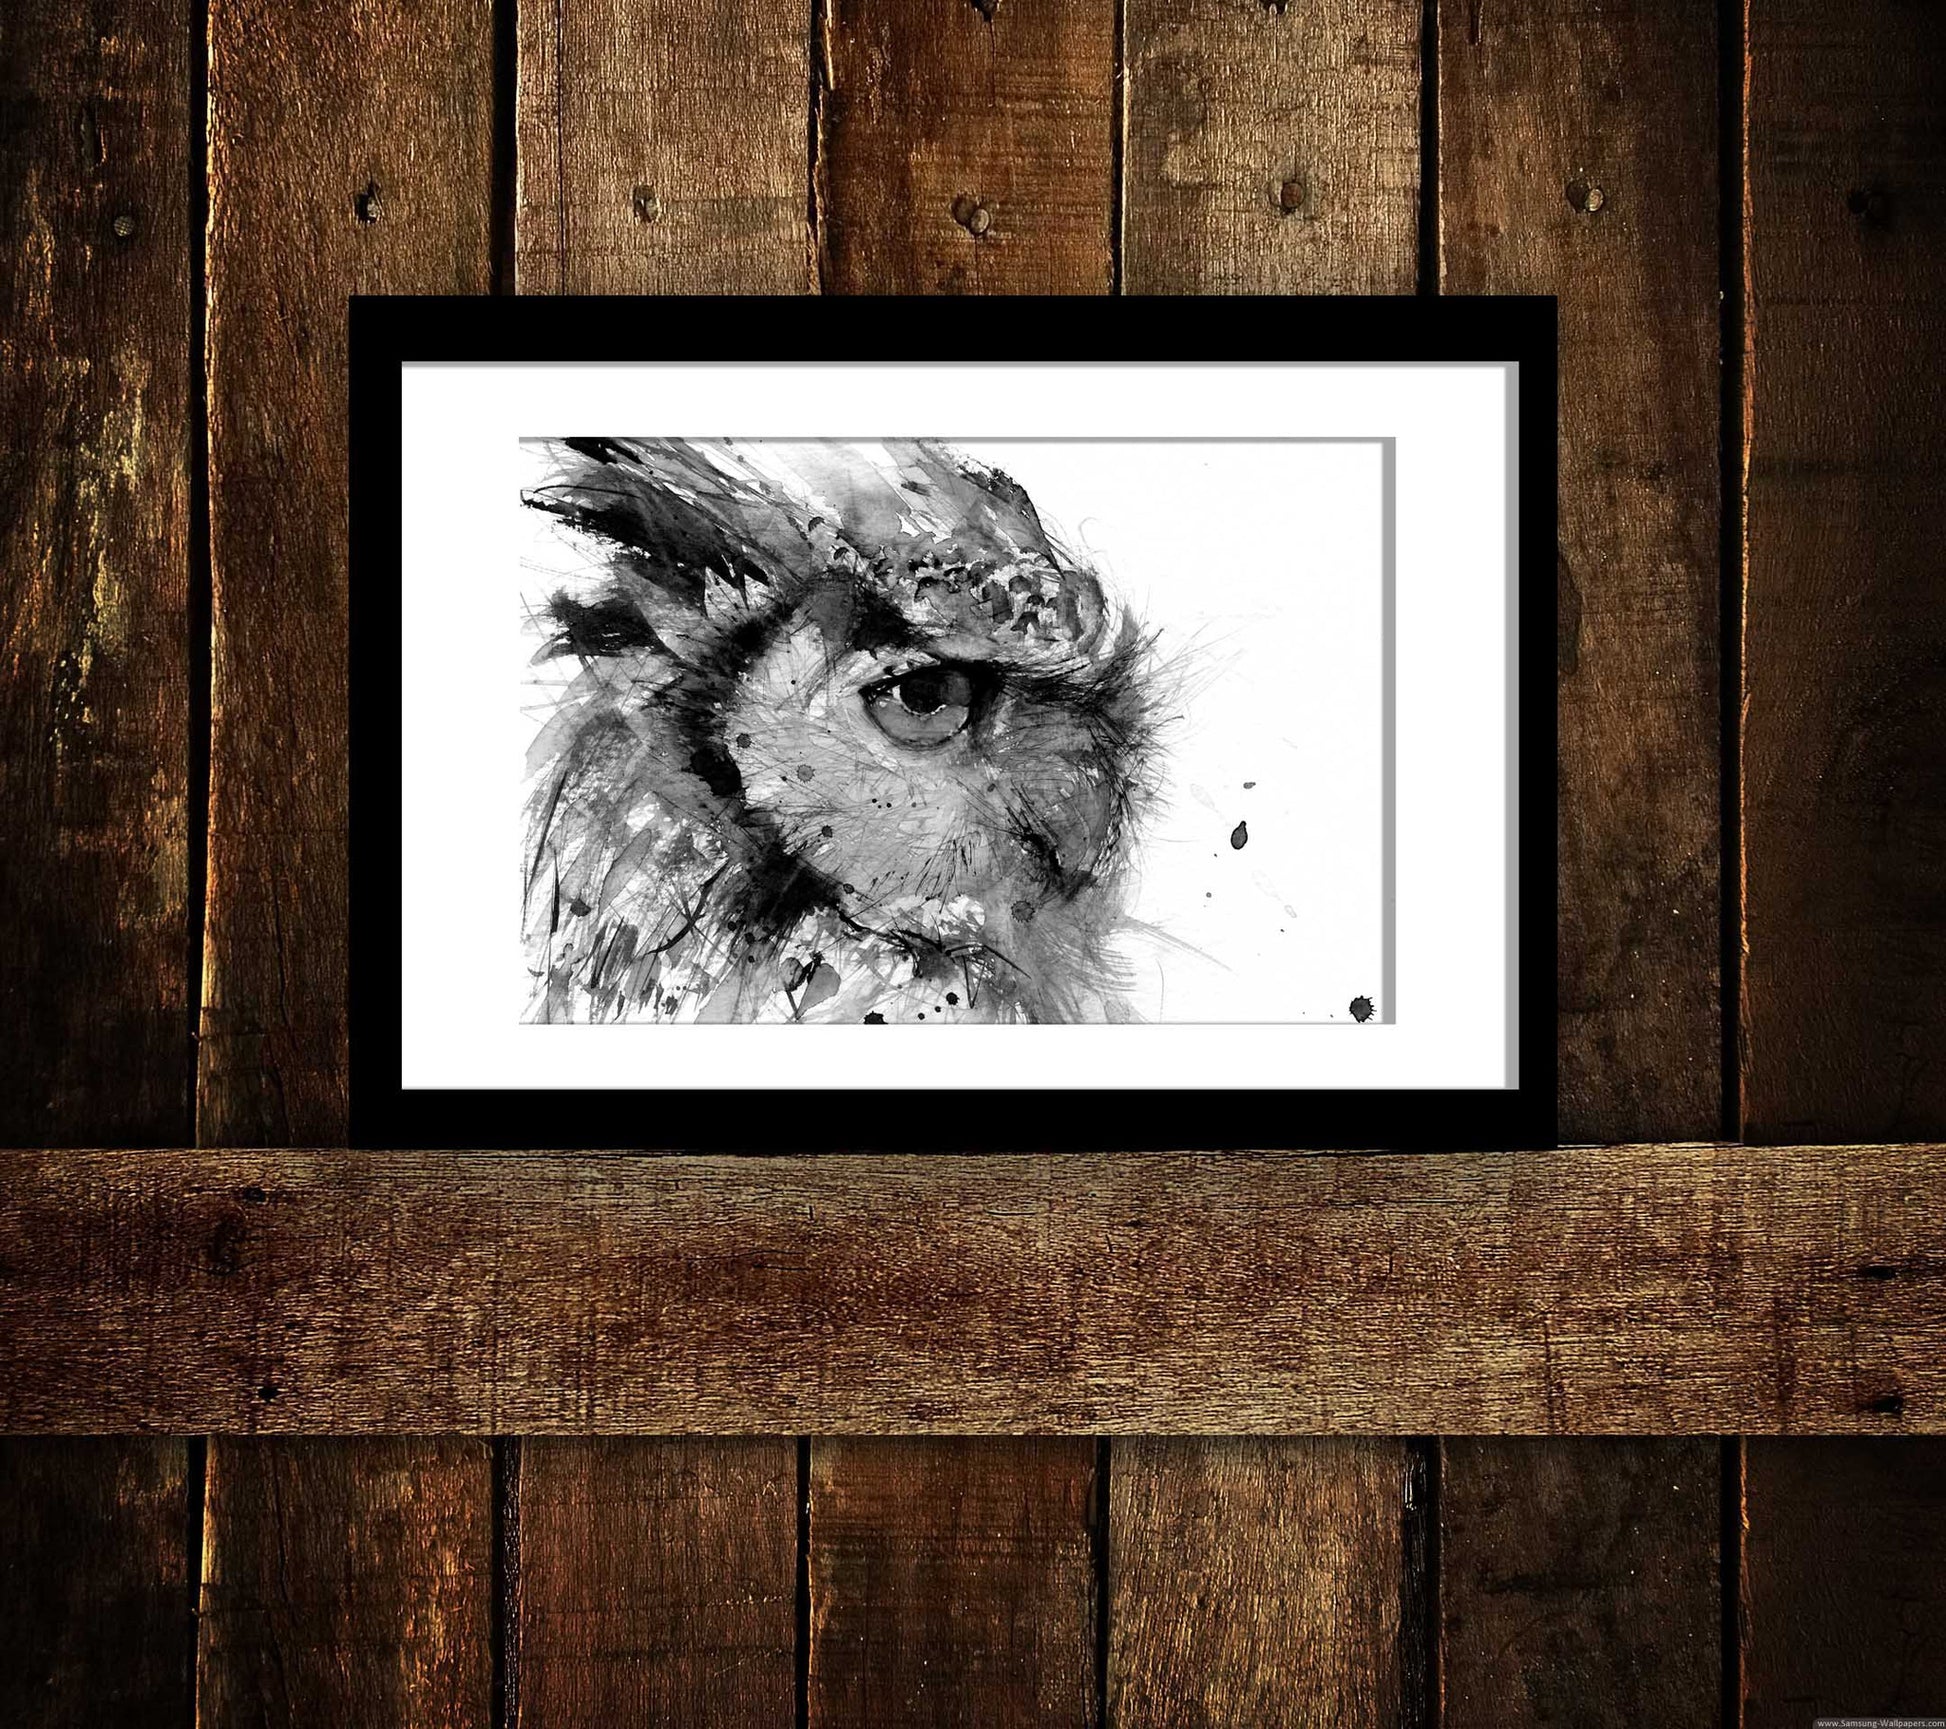 JEN BUCKLEY signed LIMITED EDITON PRINT 'Horned Owl' - Jen Buckley Art limited edition animal art prints